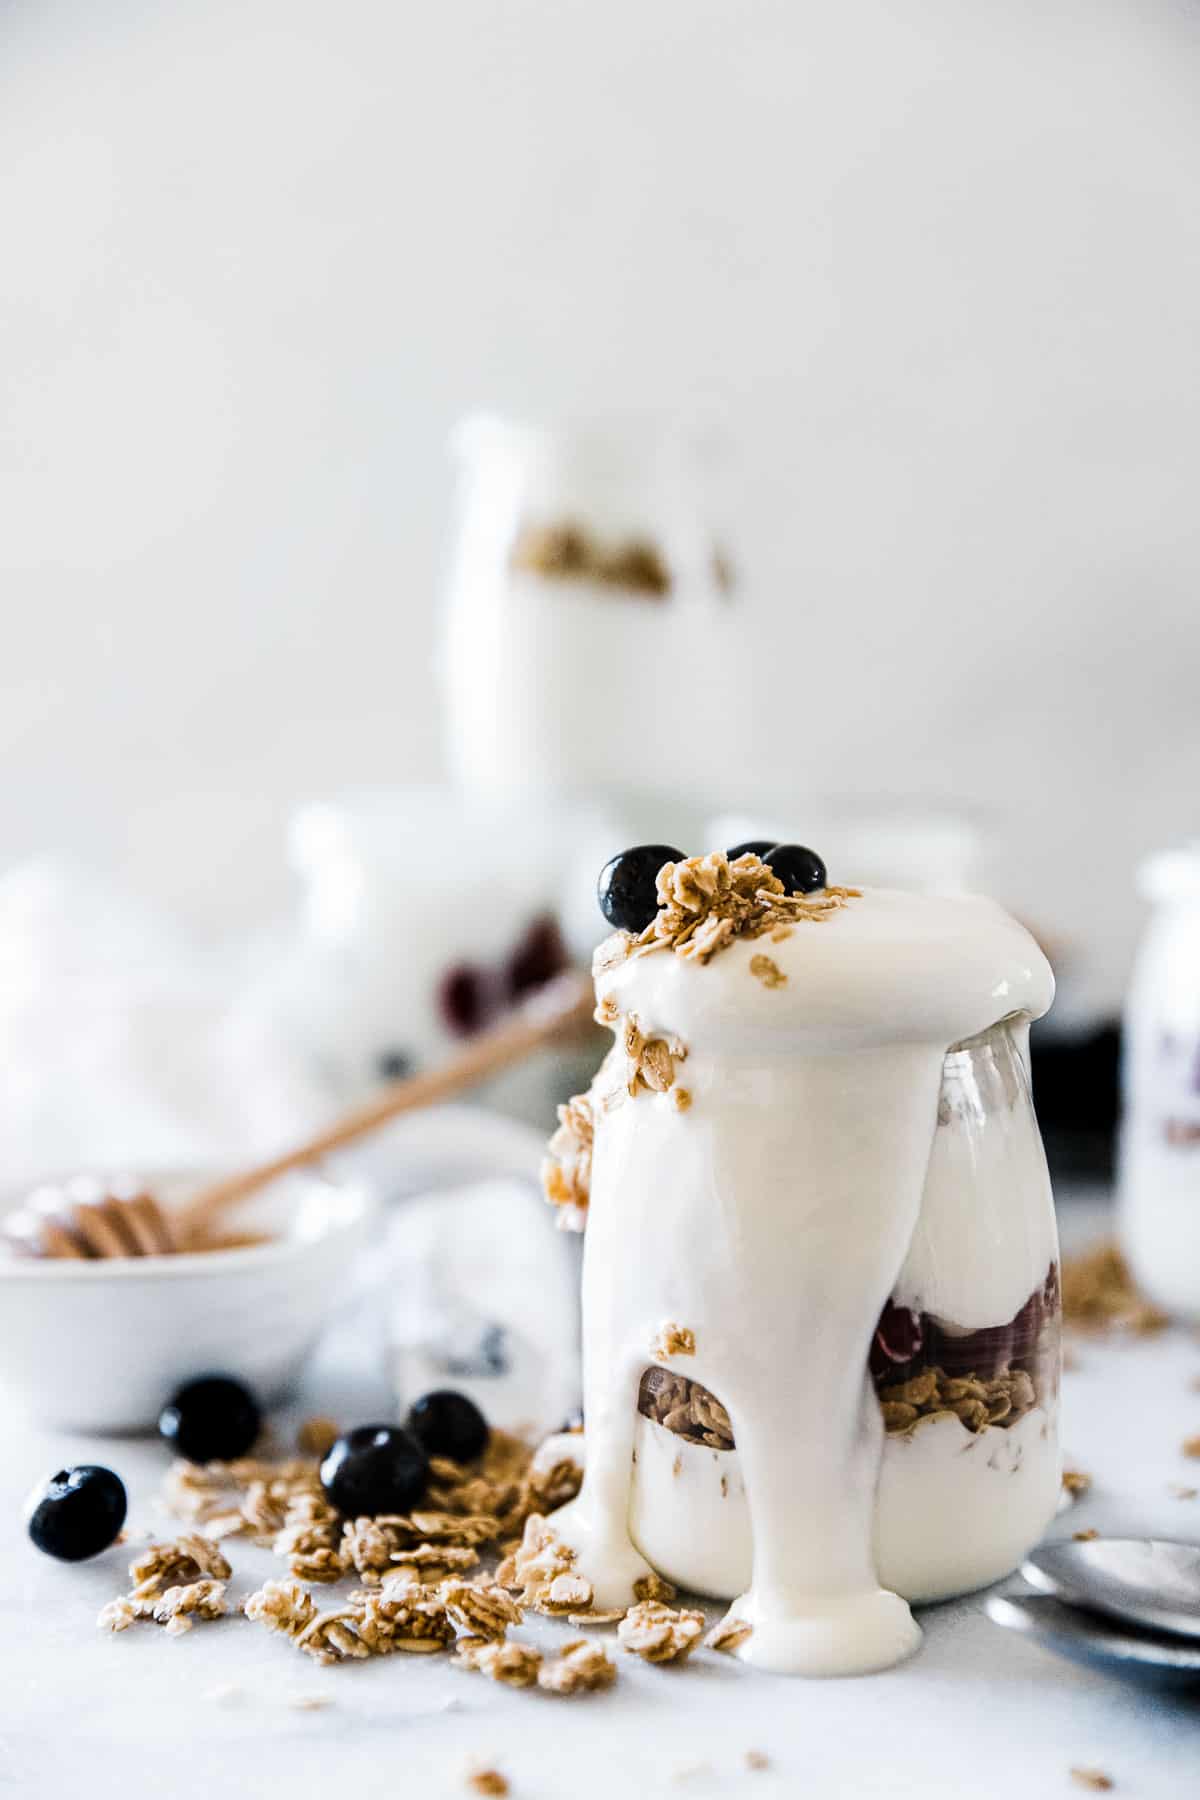 A glass jar filled with pressure cooker yogurt, granola, and berries. There is a bowl of honey to the side.